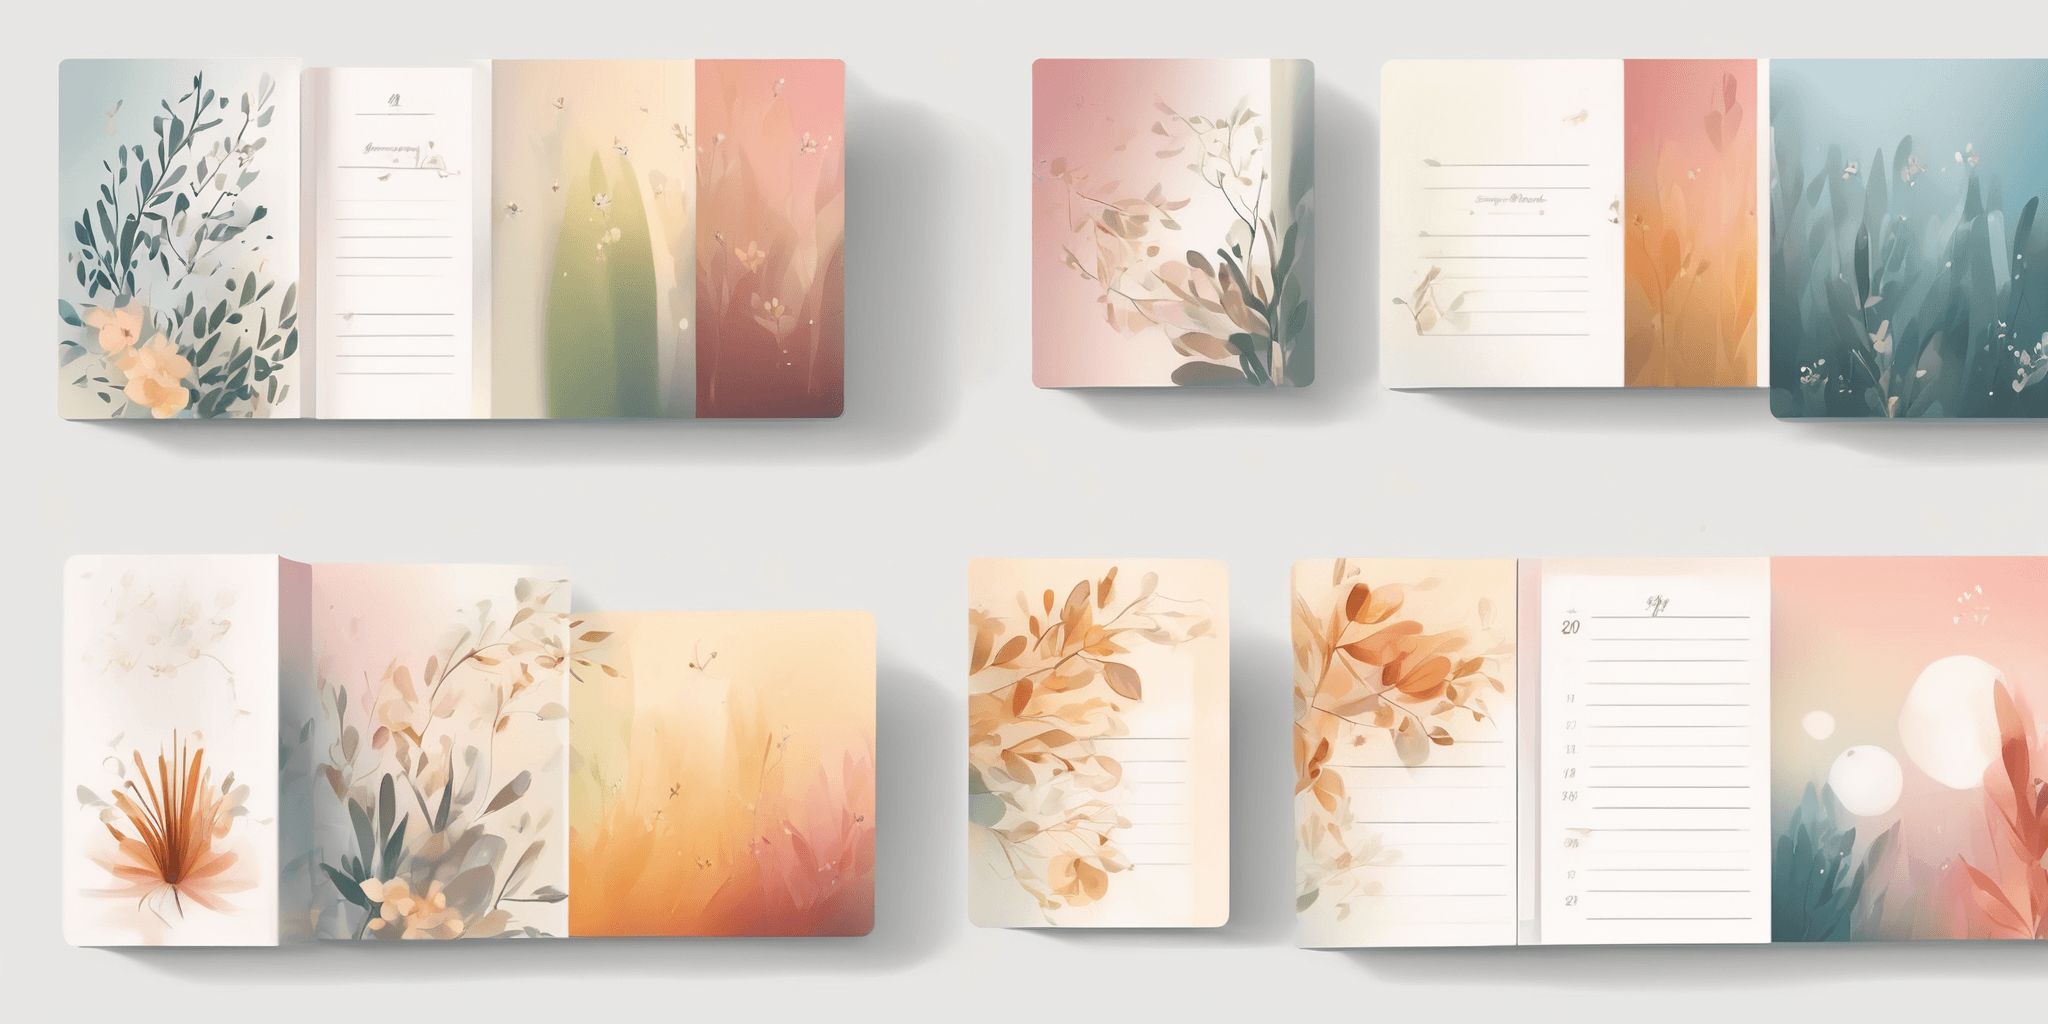 Datebook in illustration style with gradients and white background